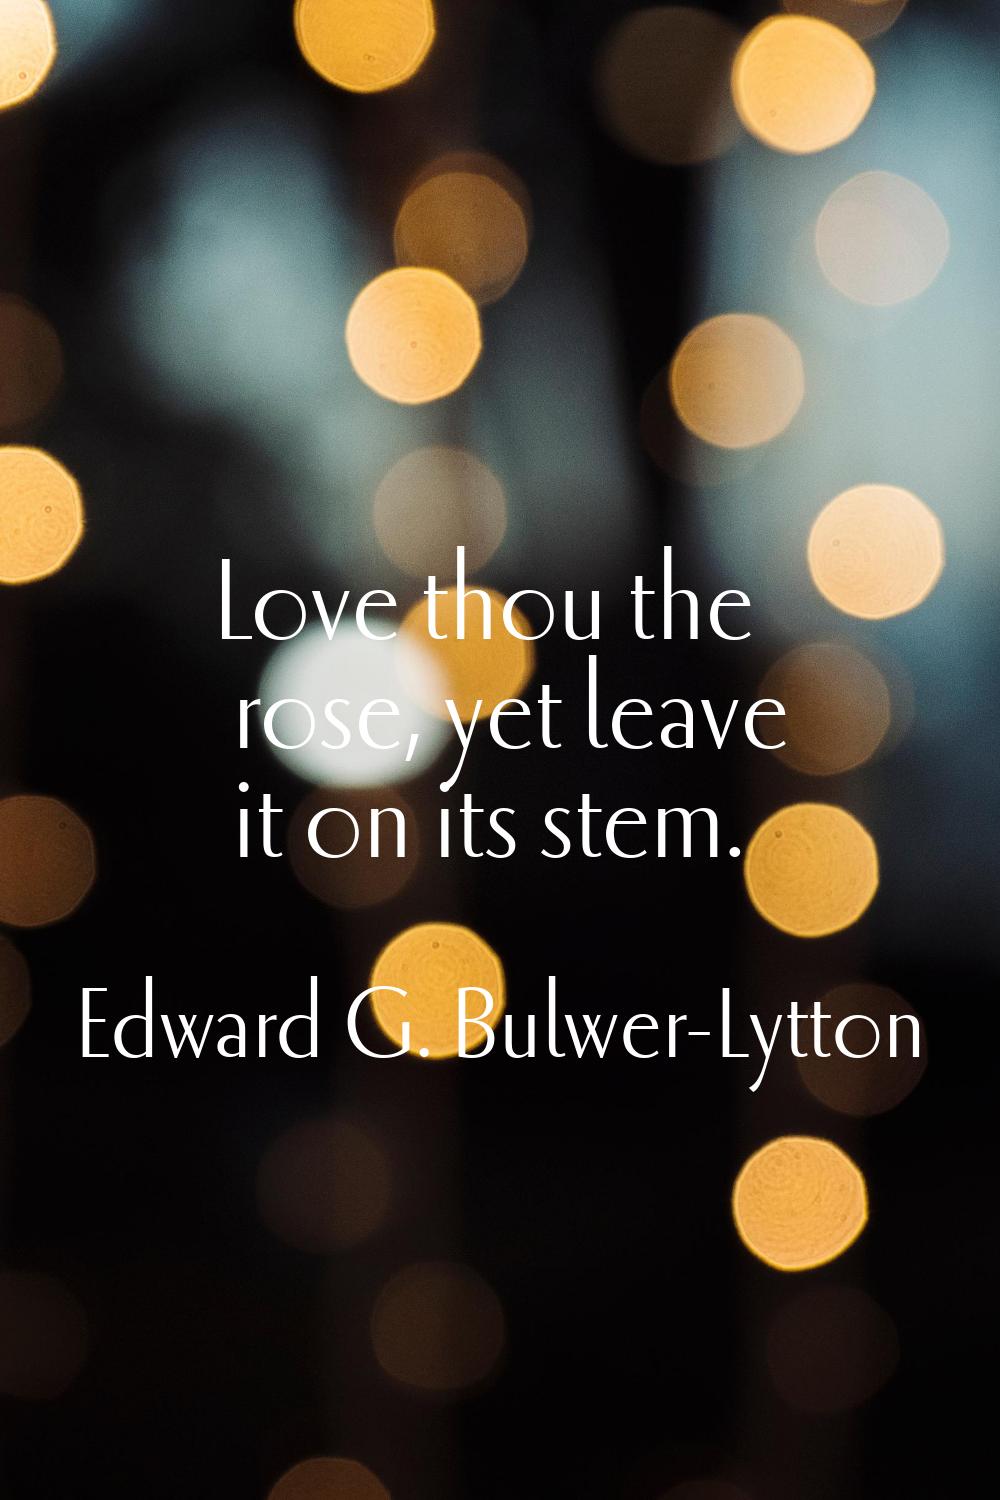 Love thou the rose, yet leave it on its stem.